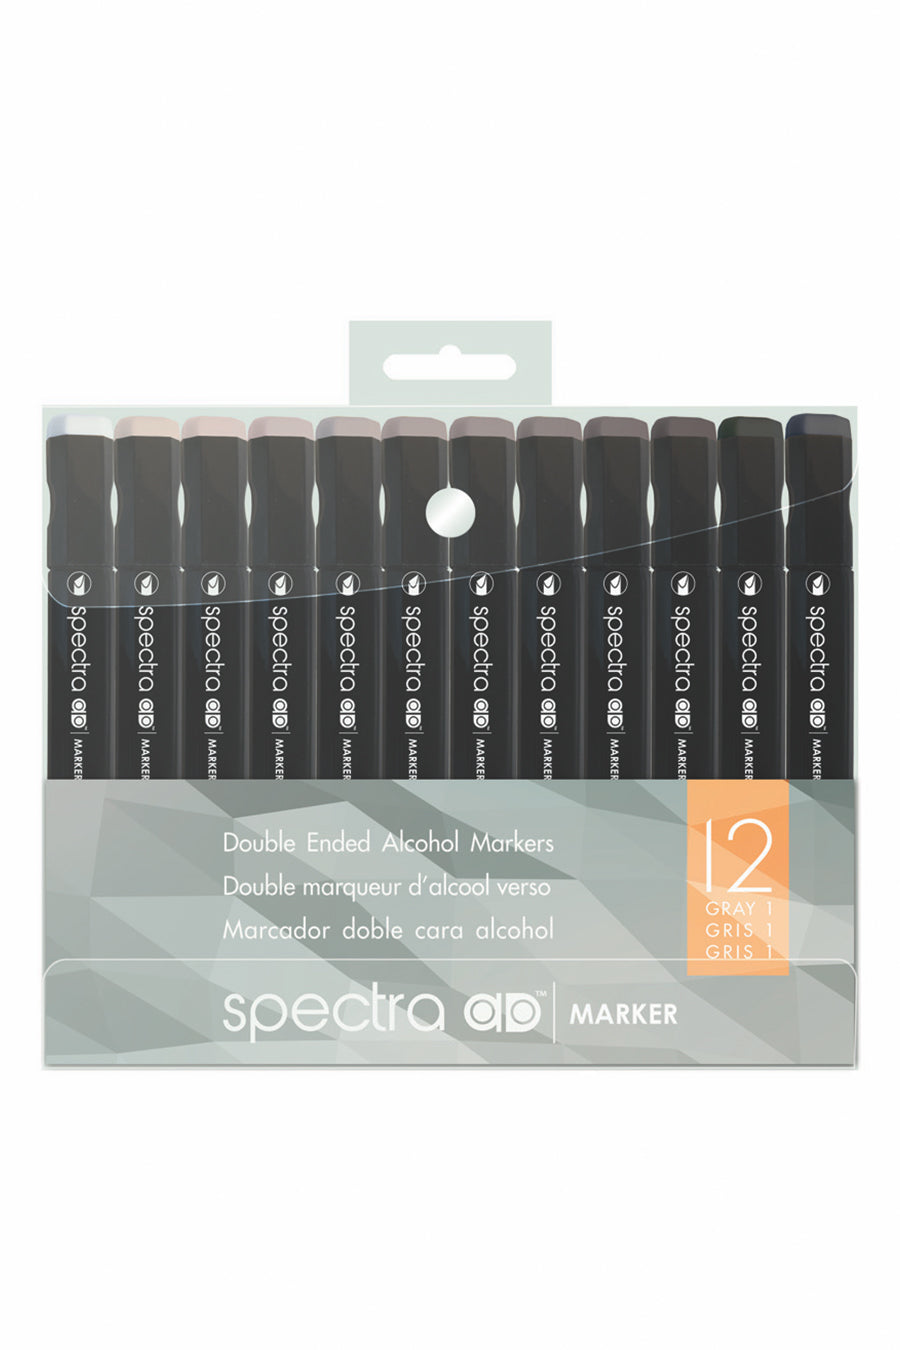 Spectra AD® Marker Warm Gray Set, 12 Colors